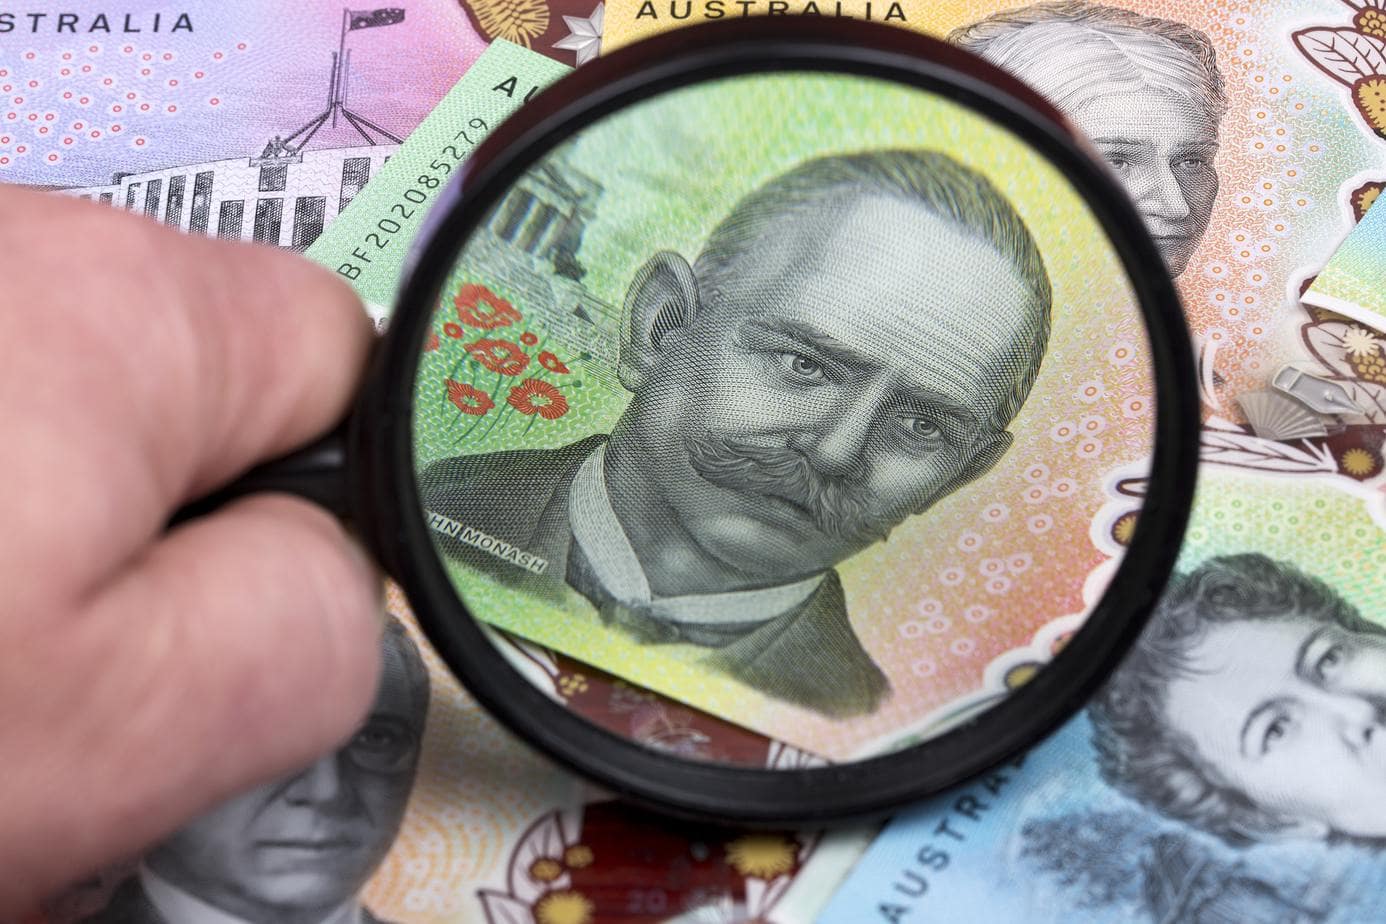 Australian dollars in a magnifying glass